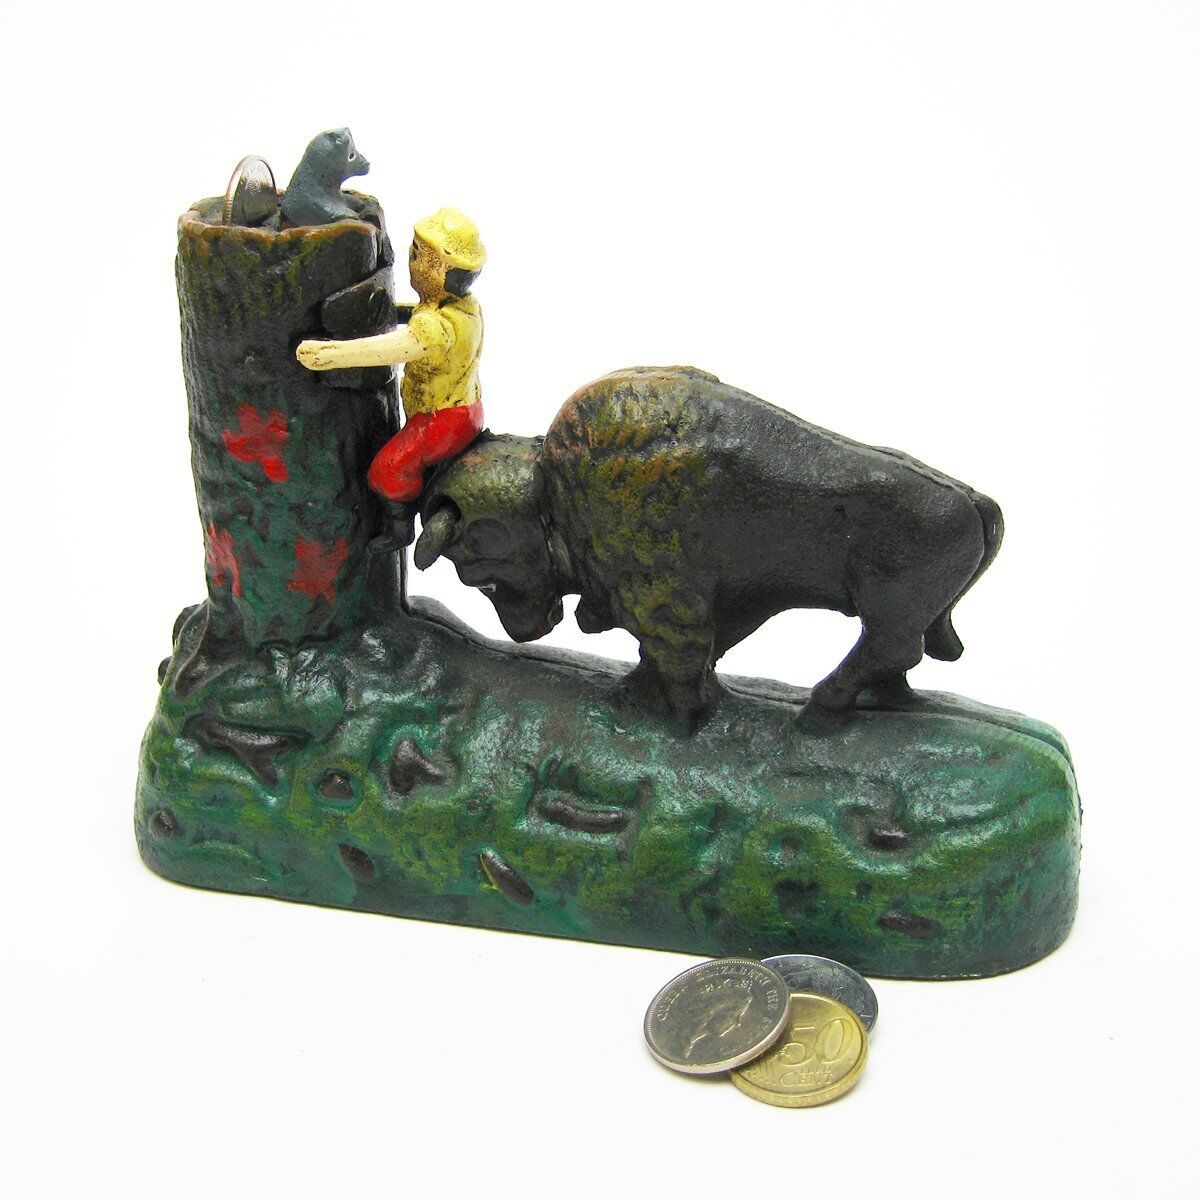 SP85 - Butting Buffalo Collectors\' Die Cast Iron Mechanical Coin Bank